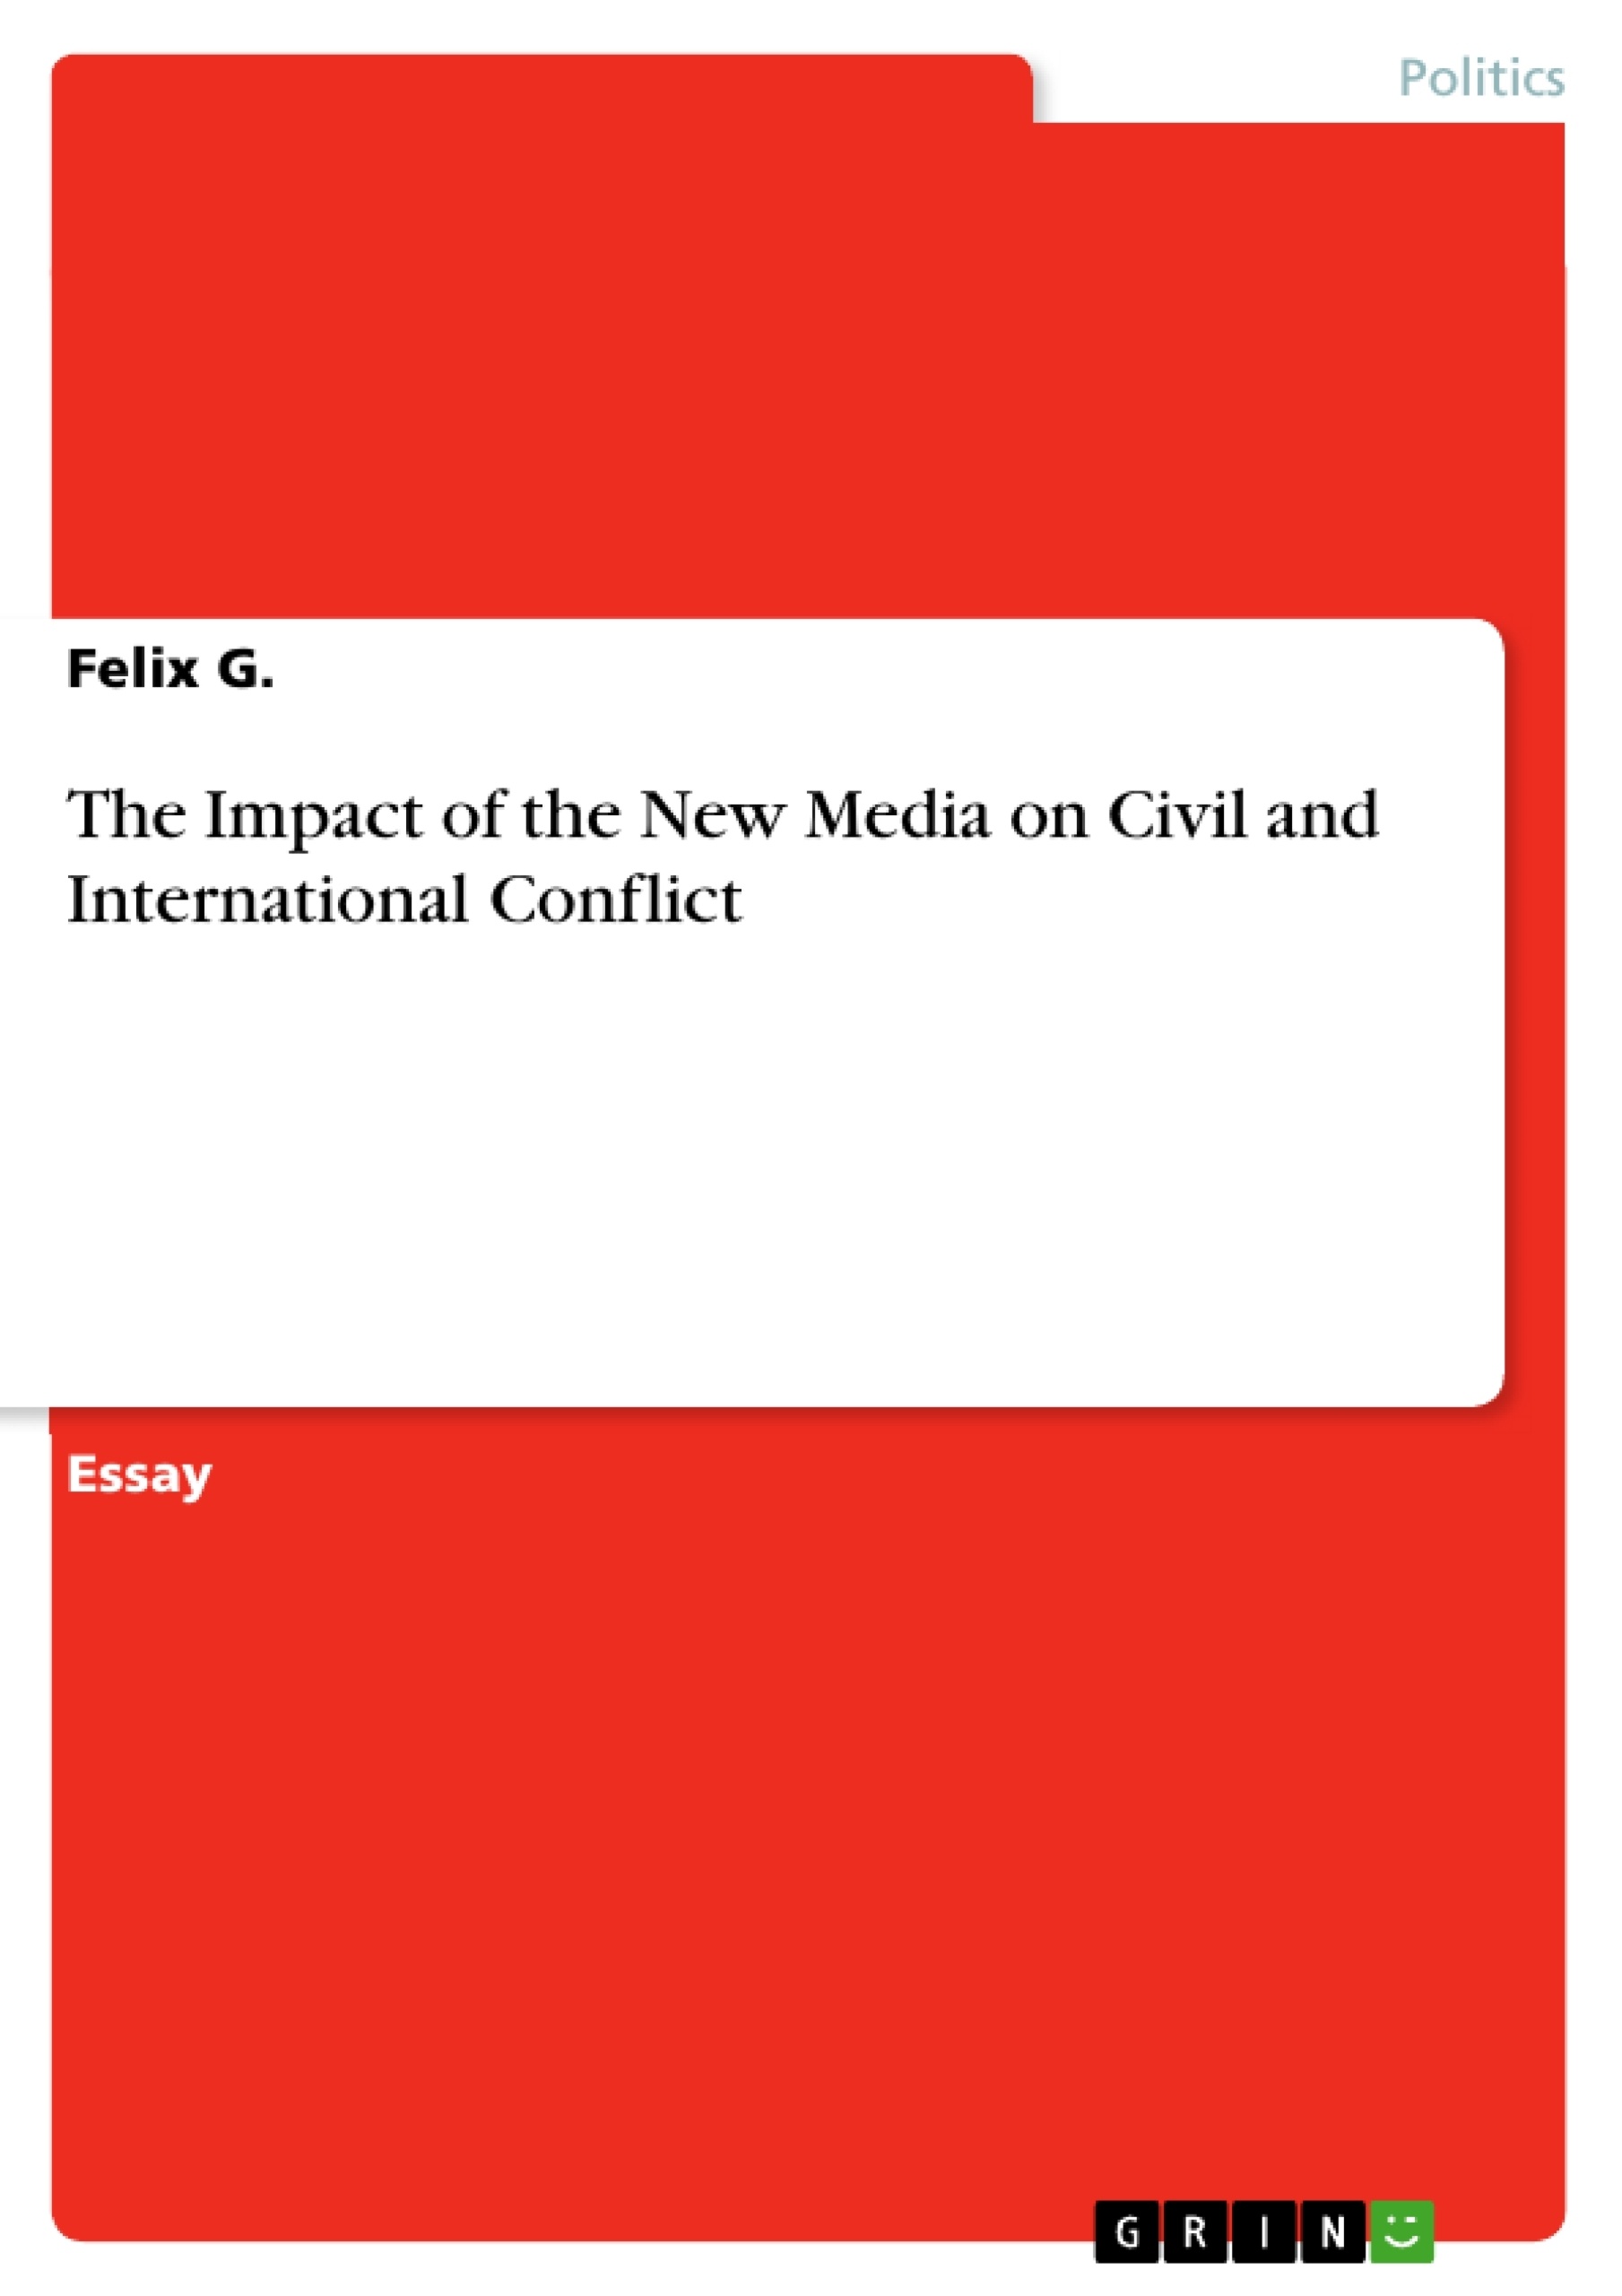 Título: The Impact of the New Media on Civil and International Conflict